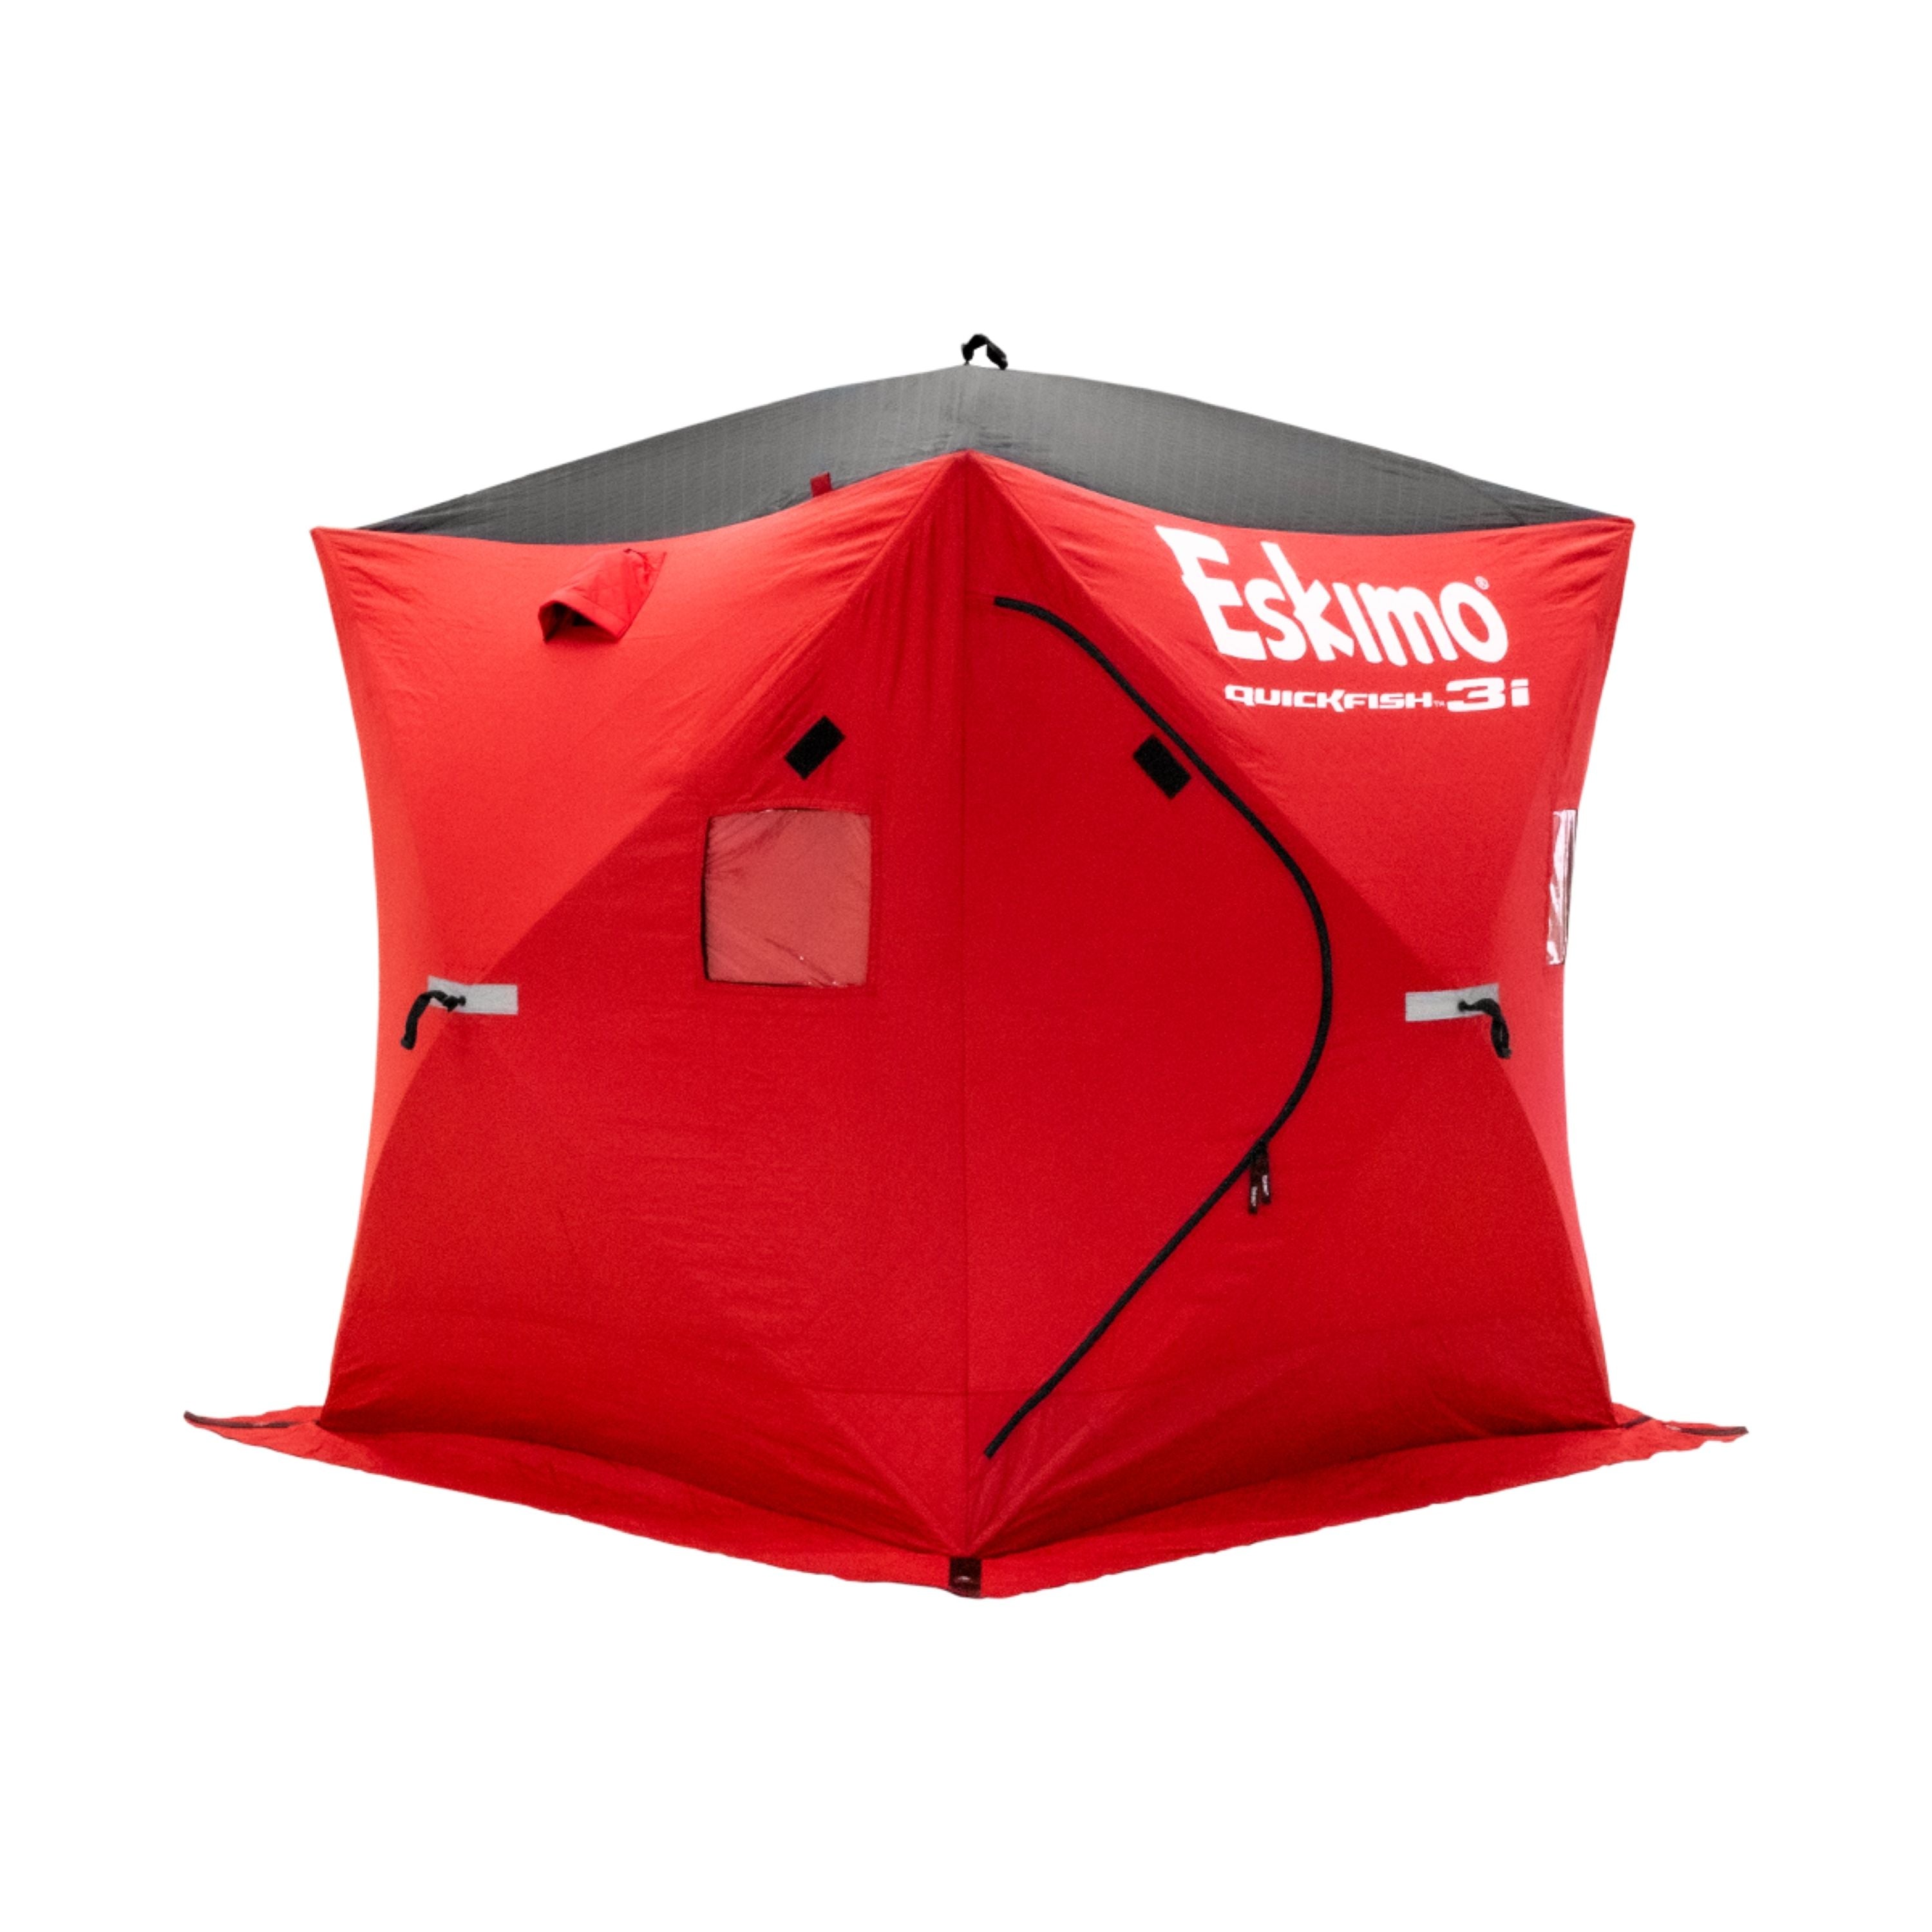 Abri "Quickfish 3i" - 3 personnes||"Quickfish 3i" Shelter - 3 persons